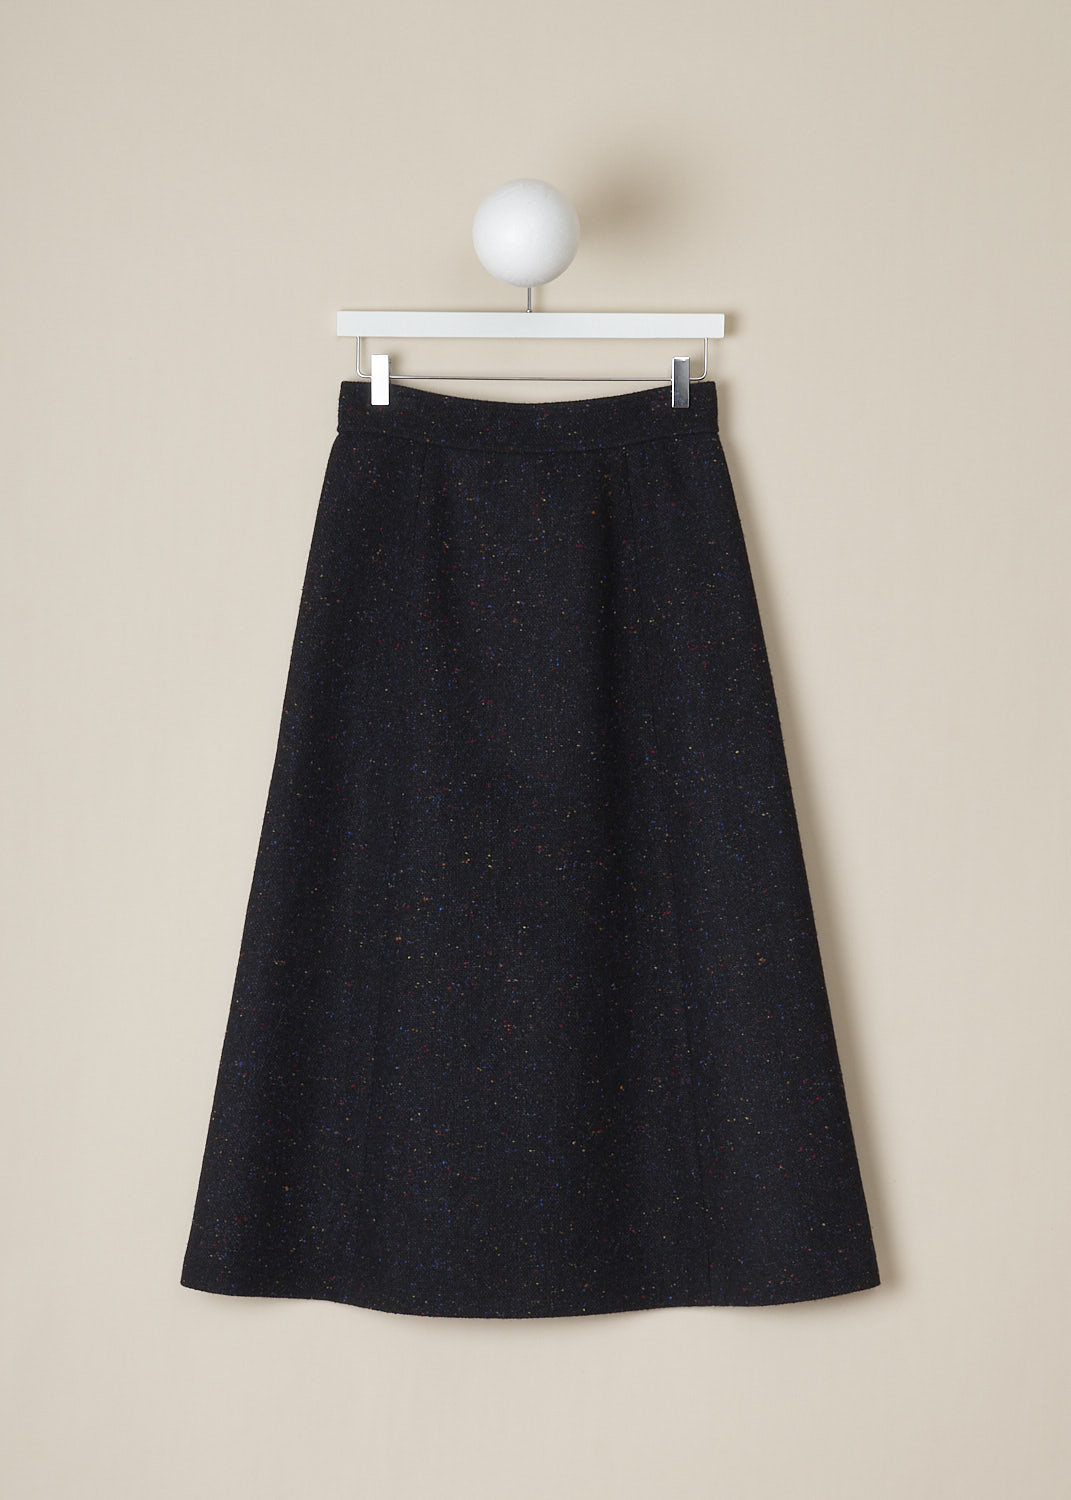 CHLOÃ‰, SPECKLED A-LINE SKIRT, CHC22AJU461654D2_ANTHRACITE_BLUE, Blue, Print, Grey, Back, This maxi A-line skirt has an anthracite blue base color with multicolored speckles throughout. The skirt has a front button closure. The skirt has slanted pockets. ,
